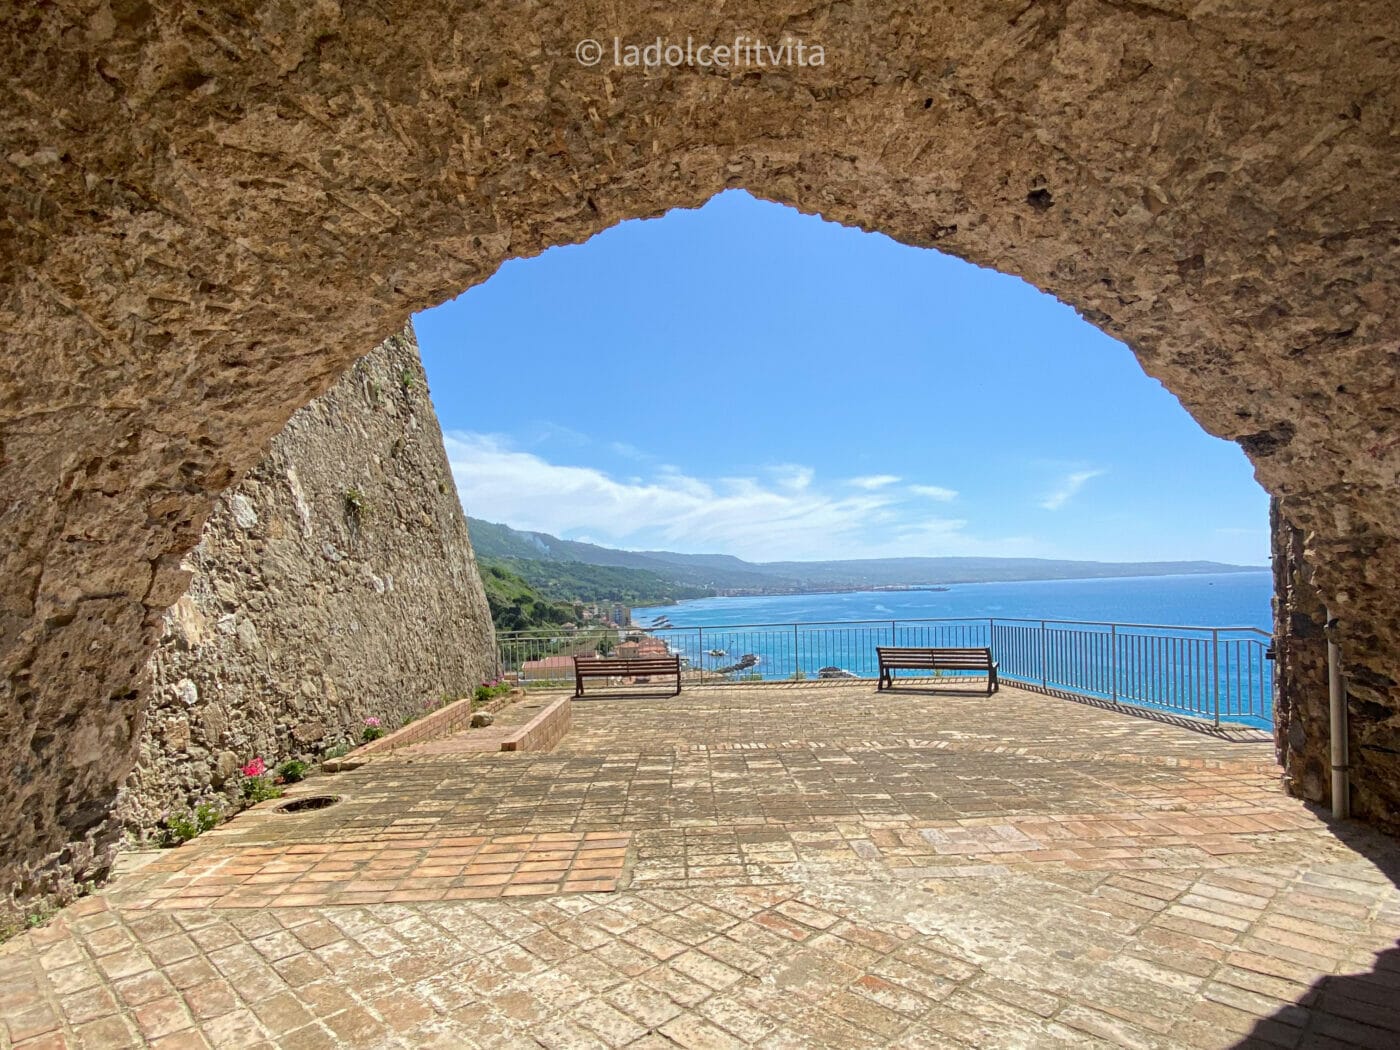 beautiful seaside panorama from the terraces at Murat Castle in Pizzo Calabria, Italy